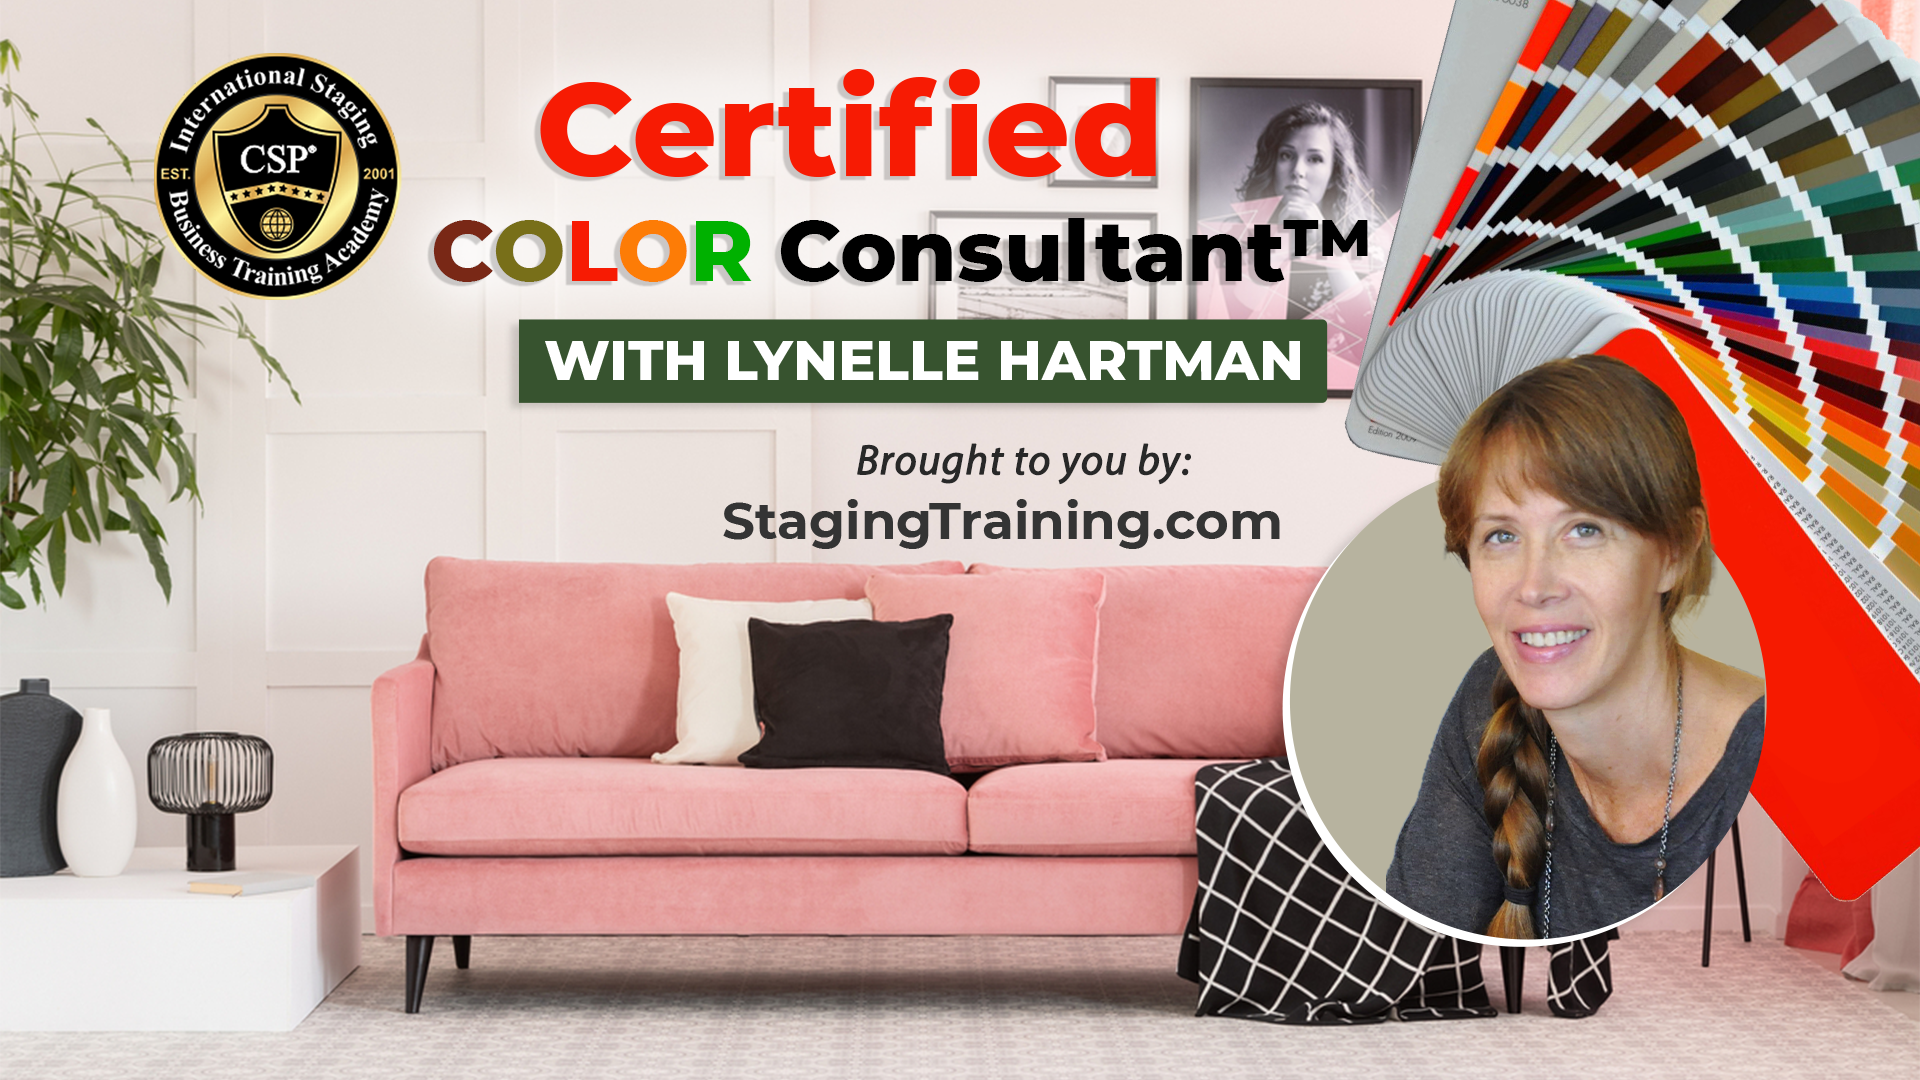 Certified Color Consultant course banner image